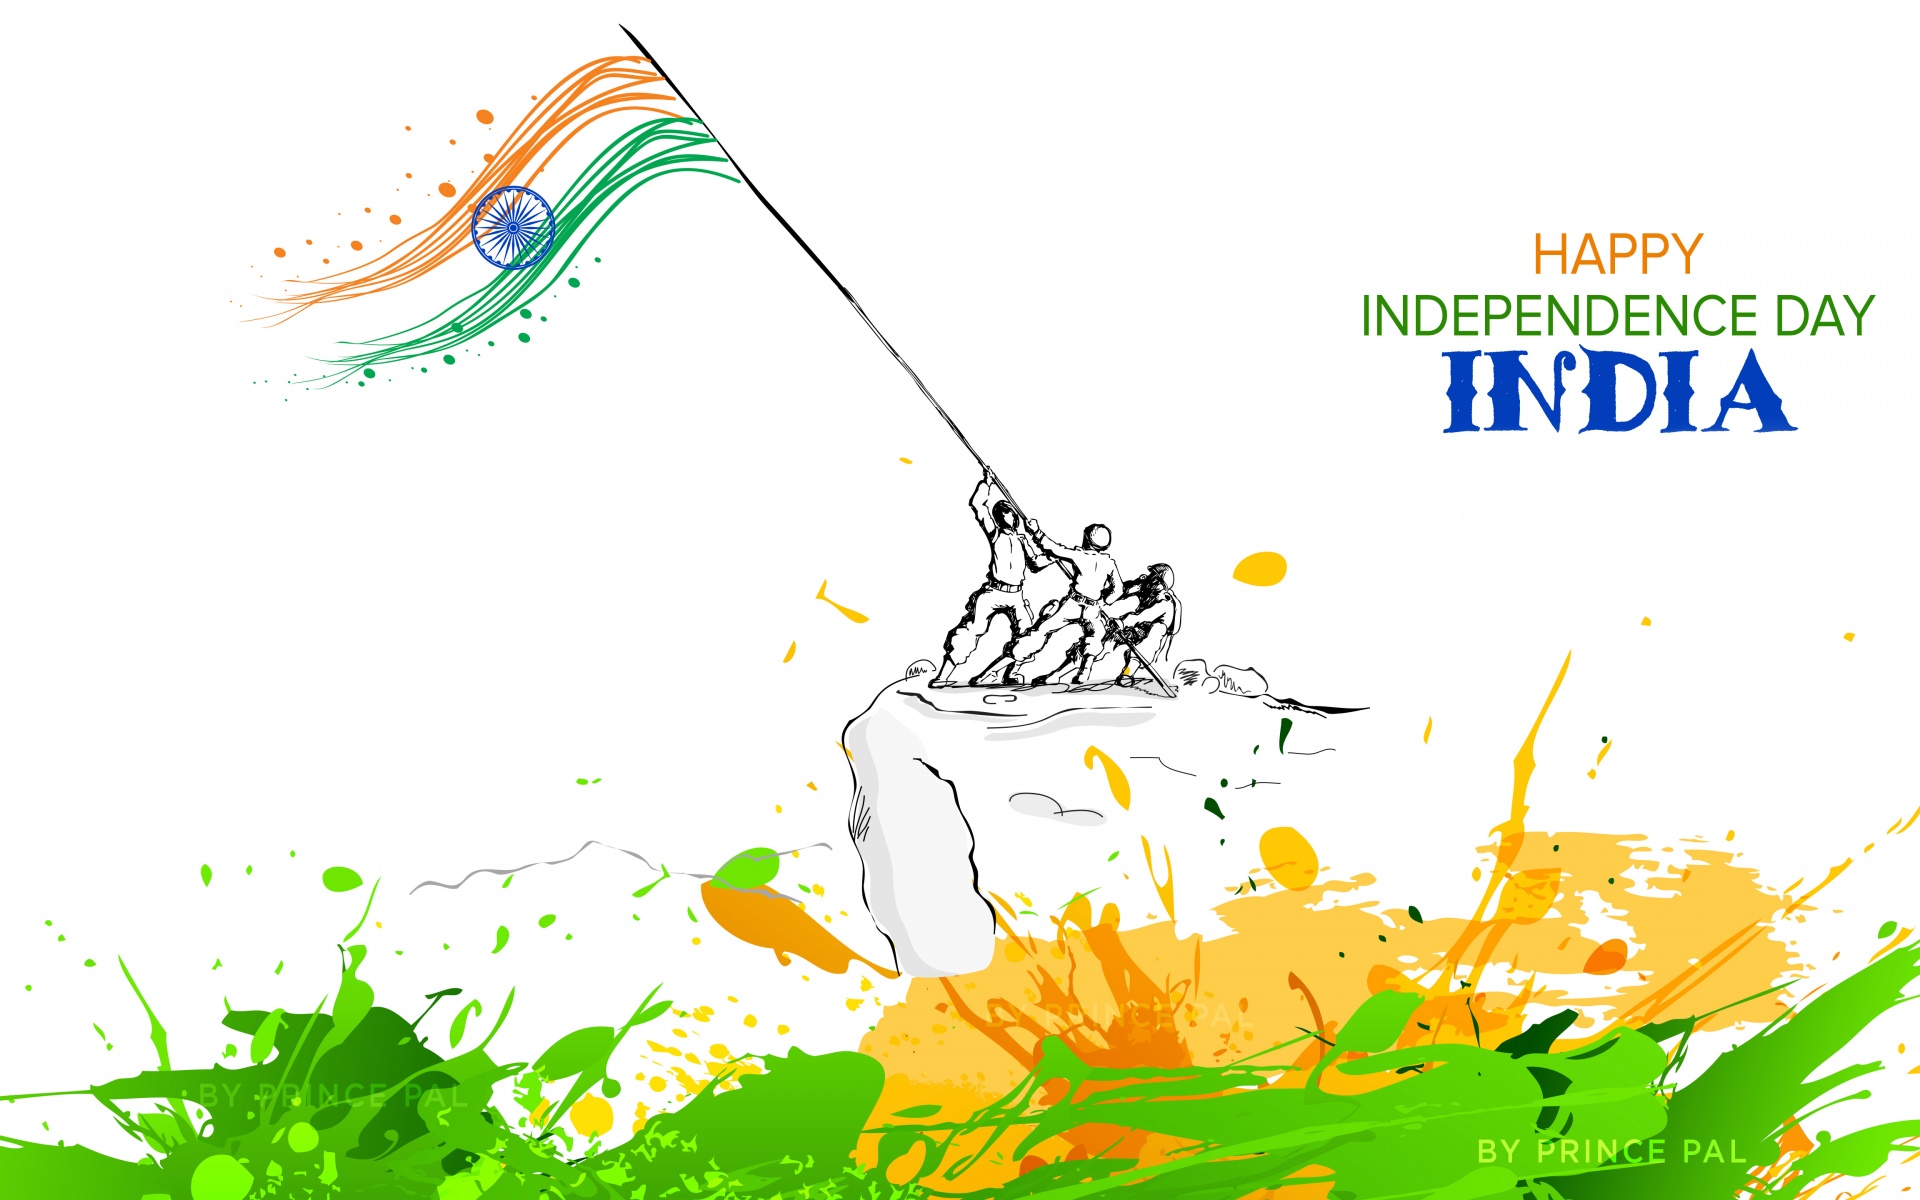 Independence Day Wallpaper 4K, India, August 15th, Tricolor, Indian Flag, Celebrations